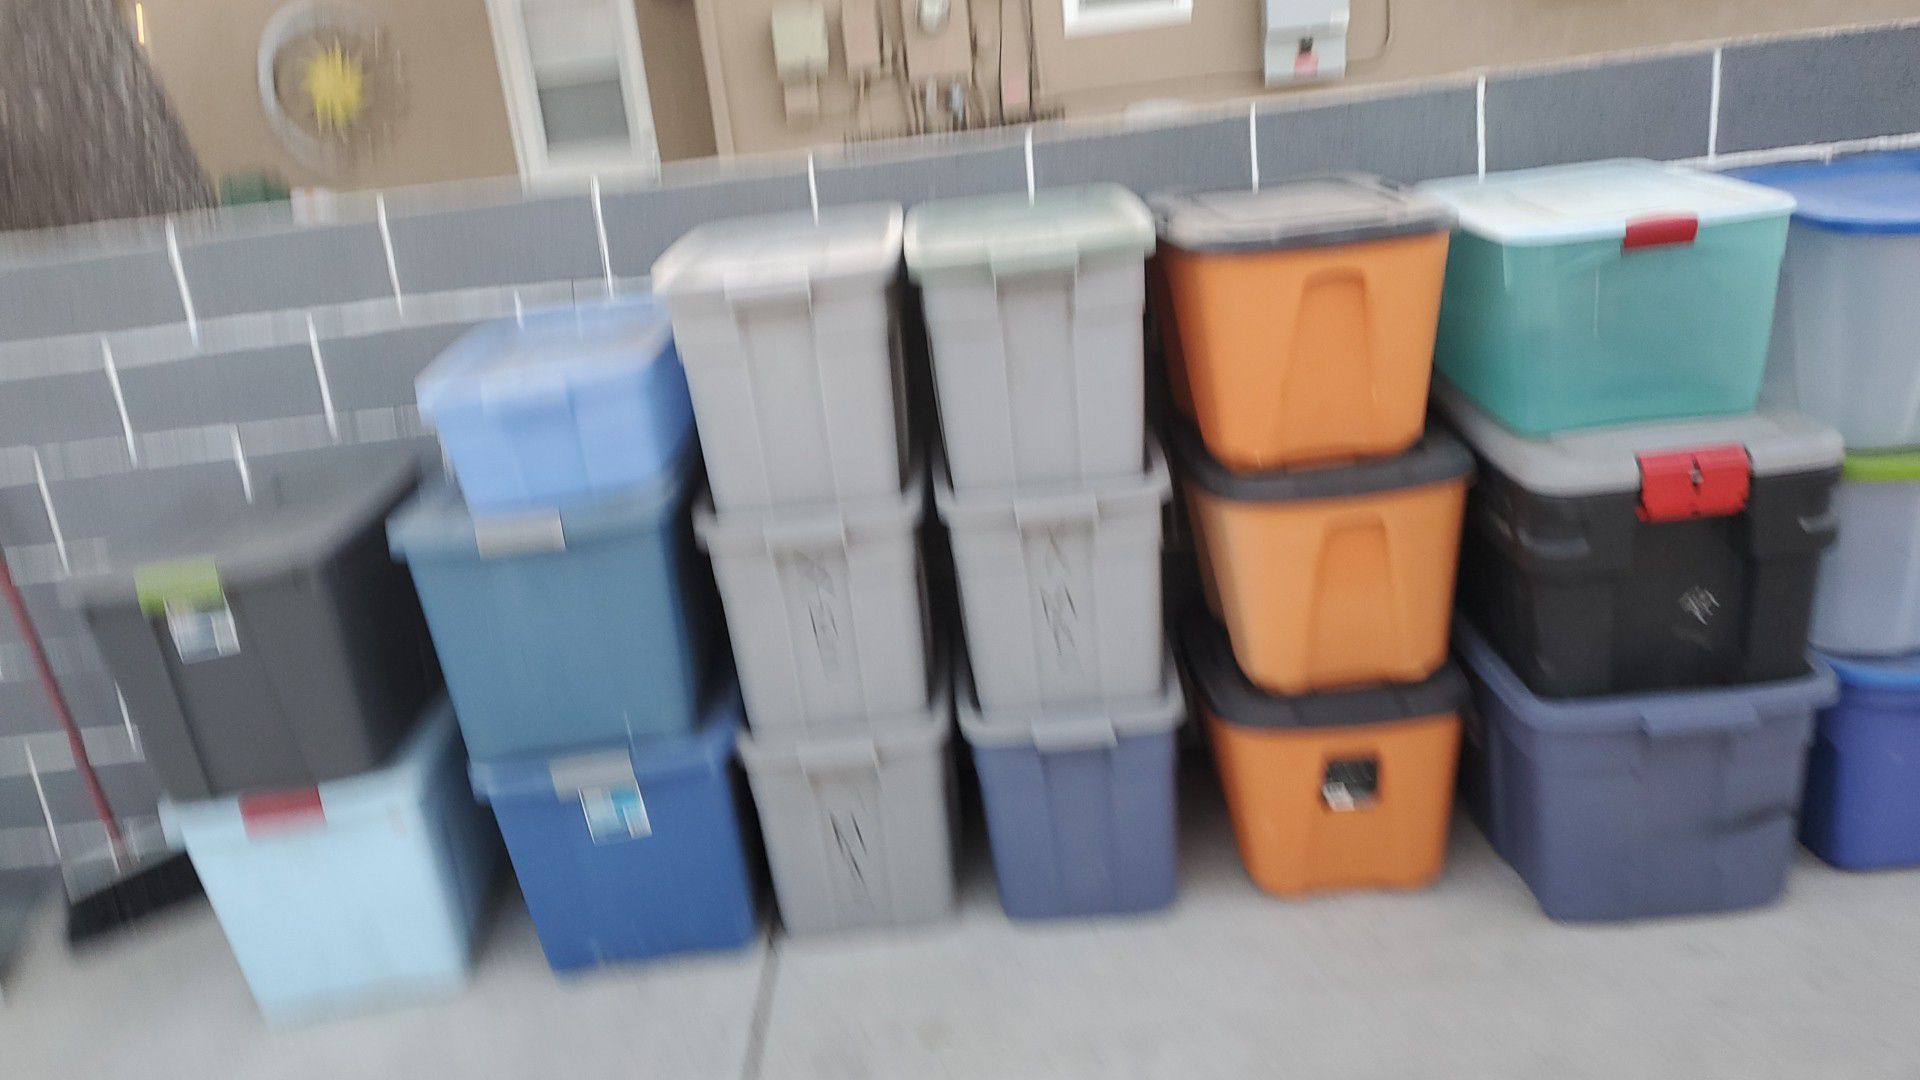 20 empty storage containers